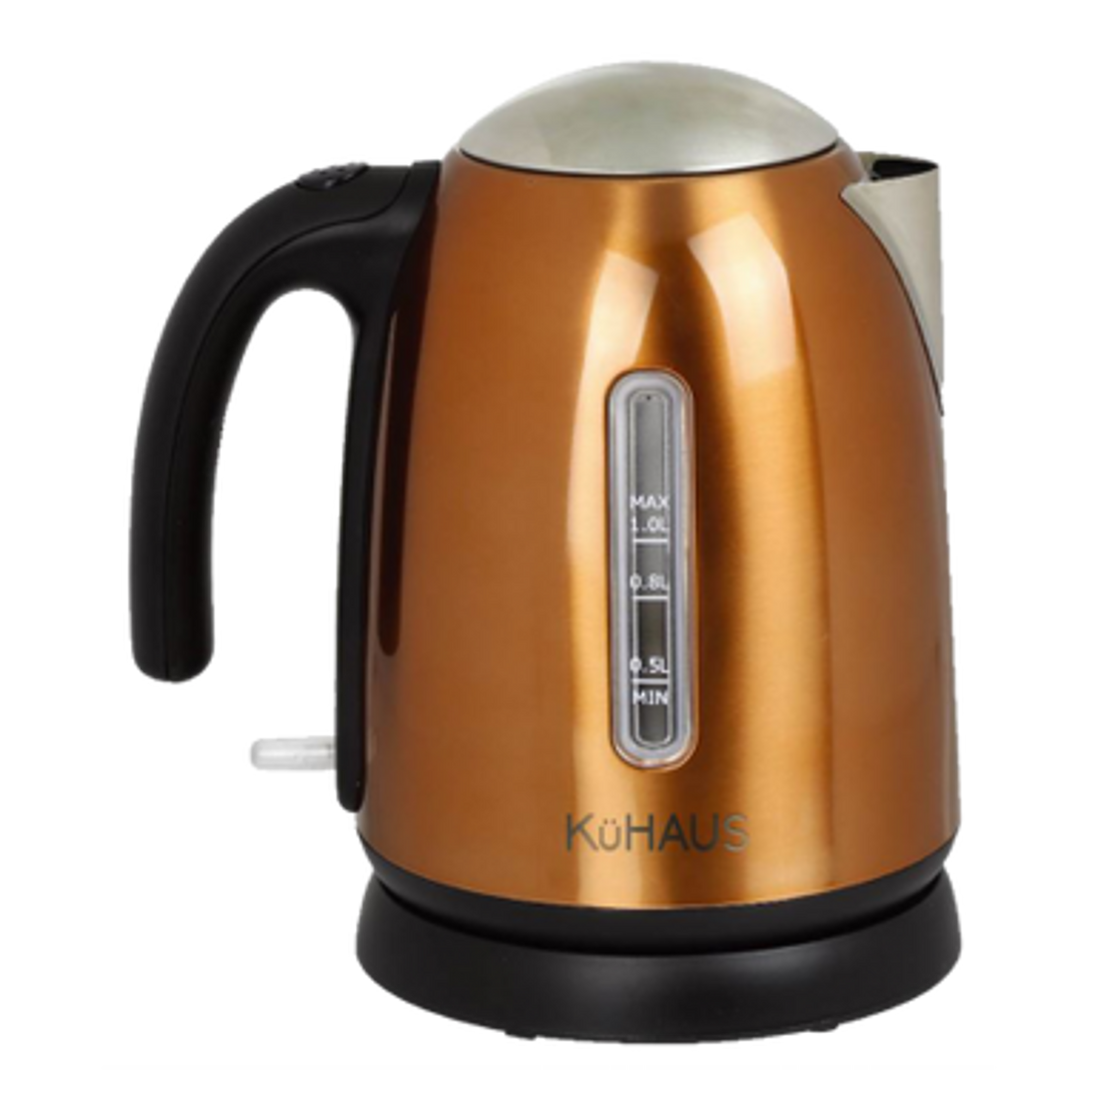 KUHAUS Electric Stainless Kettle, 50.72 fl oz,Pink 